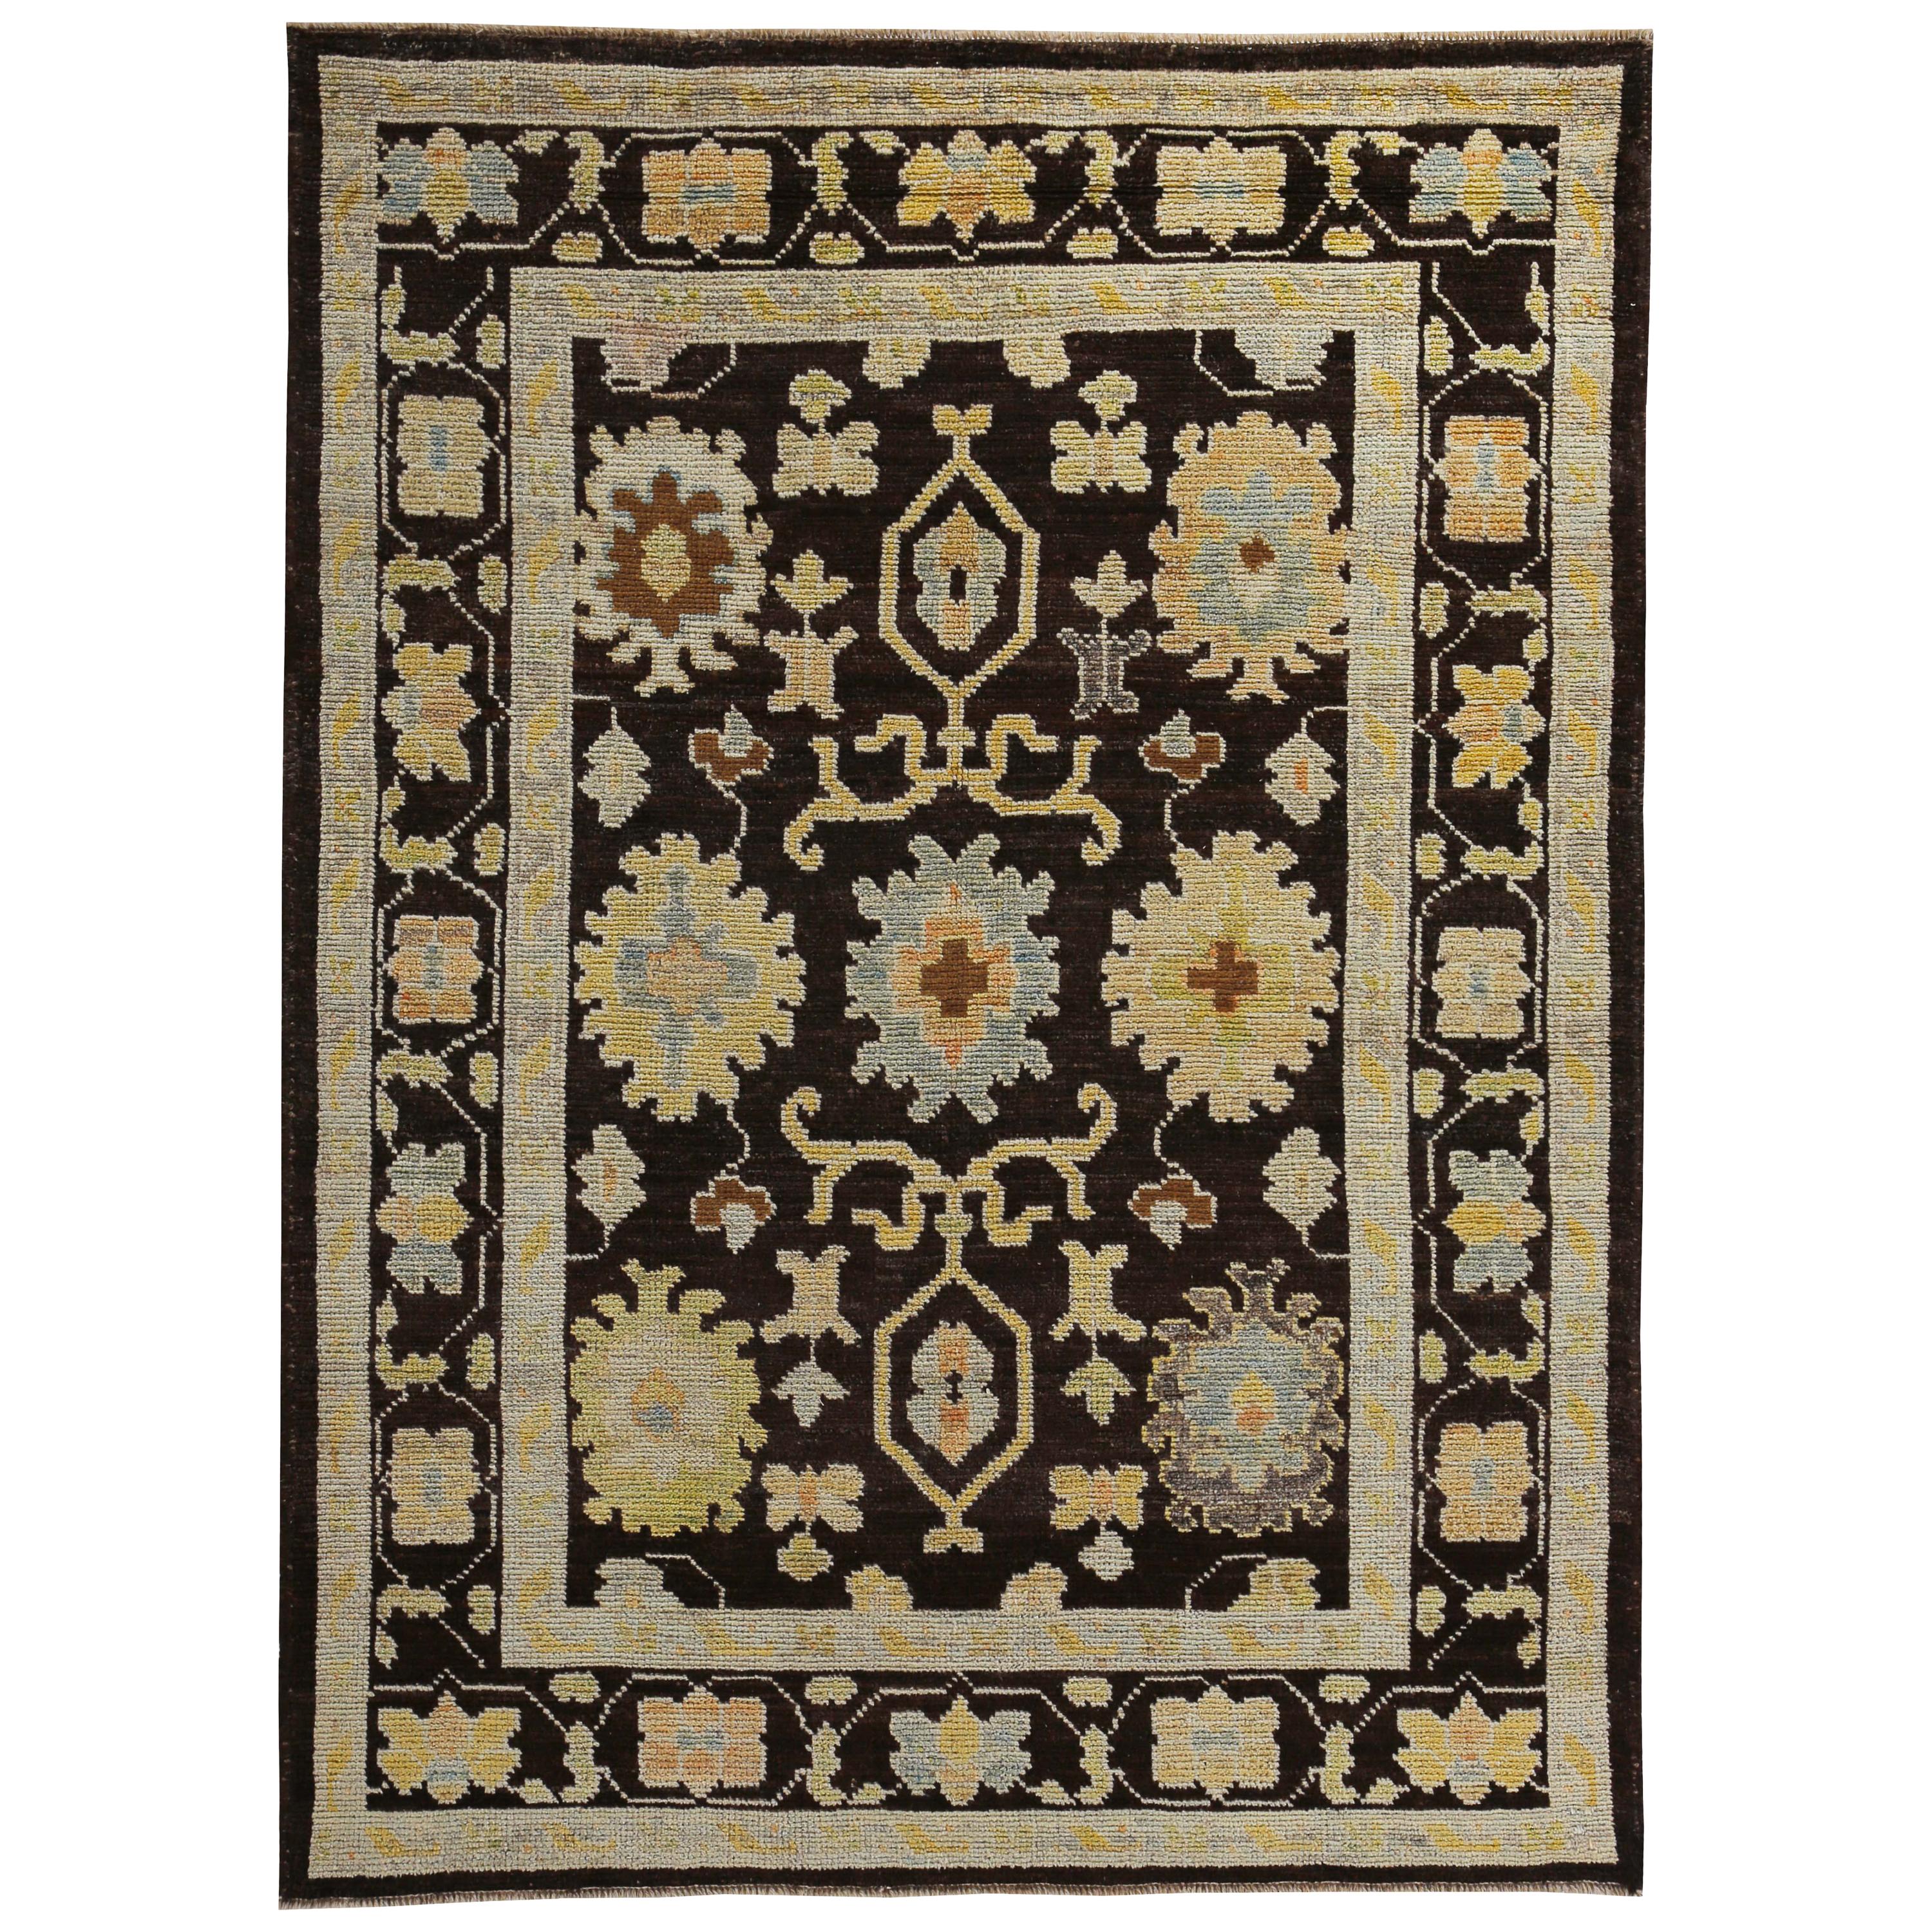 New Turkish Oushak Rug with Blue, Yellow and Green Floral Details on Brown Field